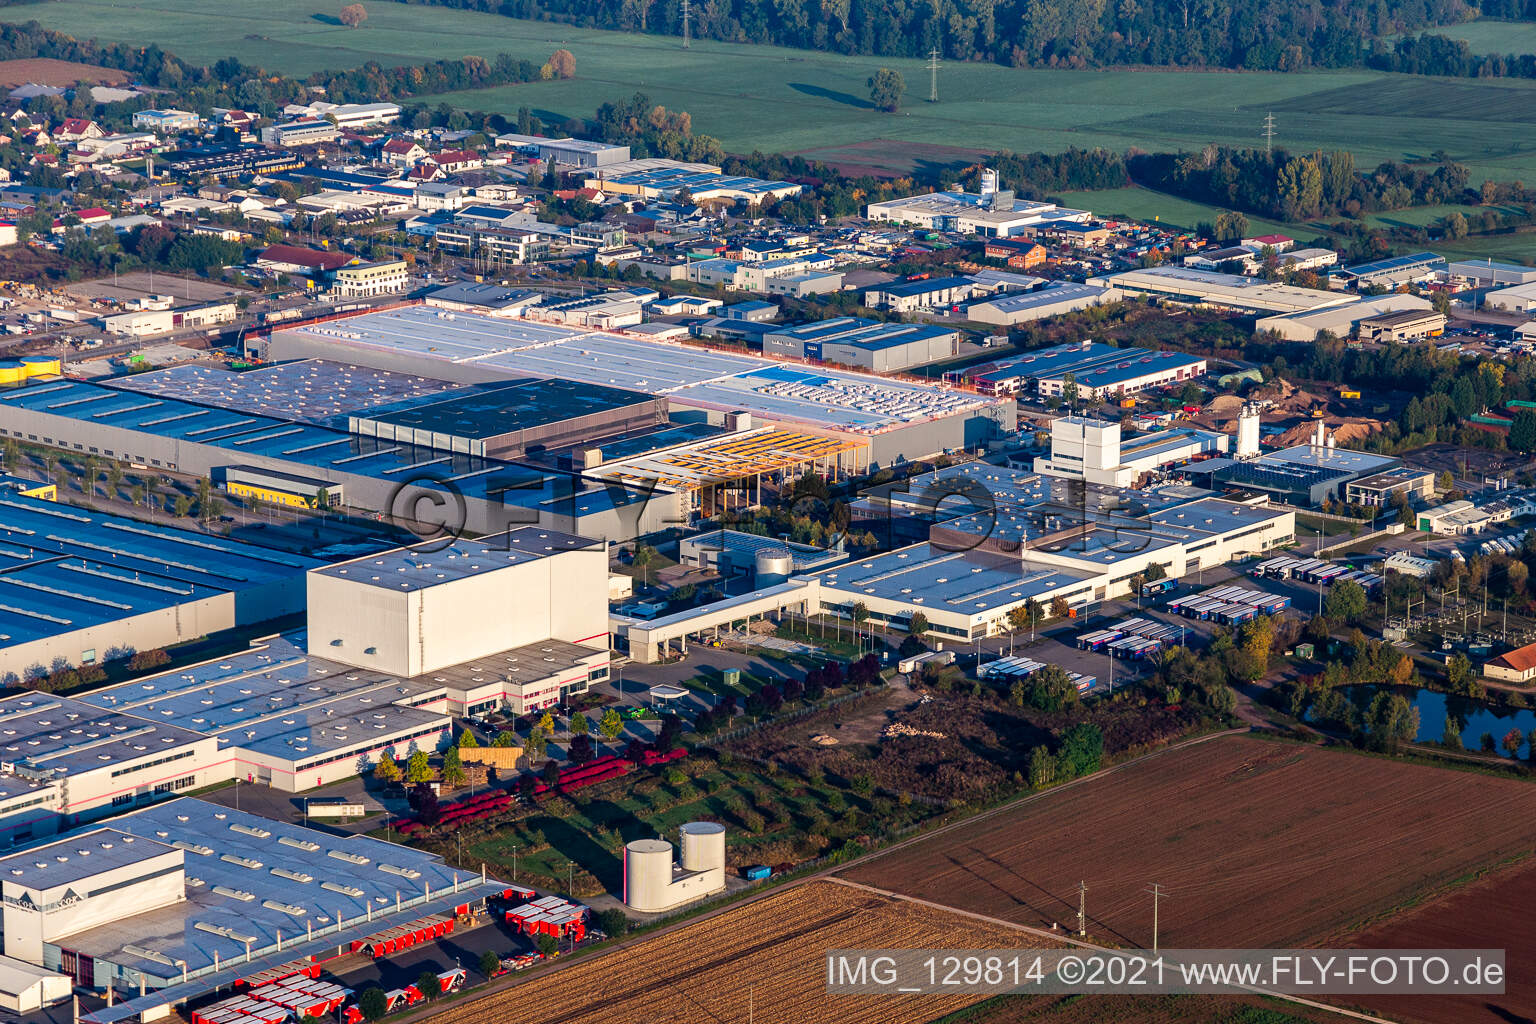 Industrial estate and company settlement Interpark with Tricor Packaging & Logistics AG, Prowell Papierverarbeitung Gmbh in Offenbach an der Queich in the state Rhineland-Palatinate, Germany